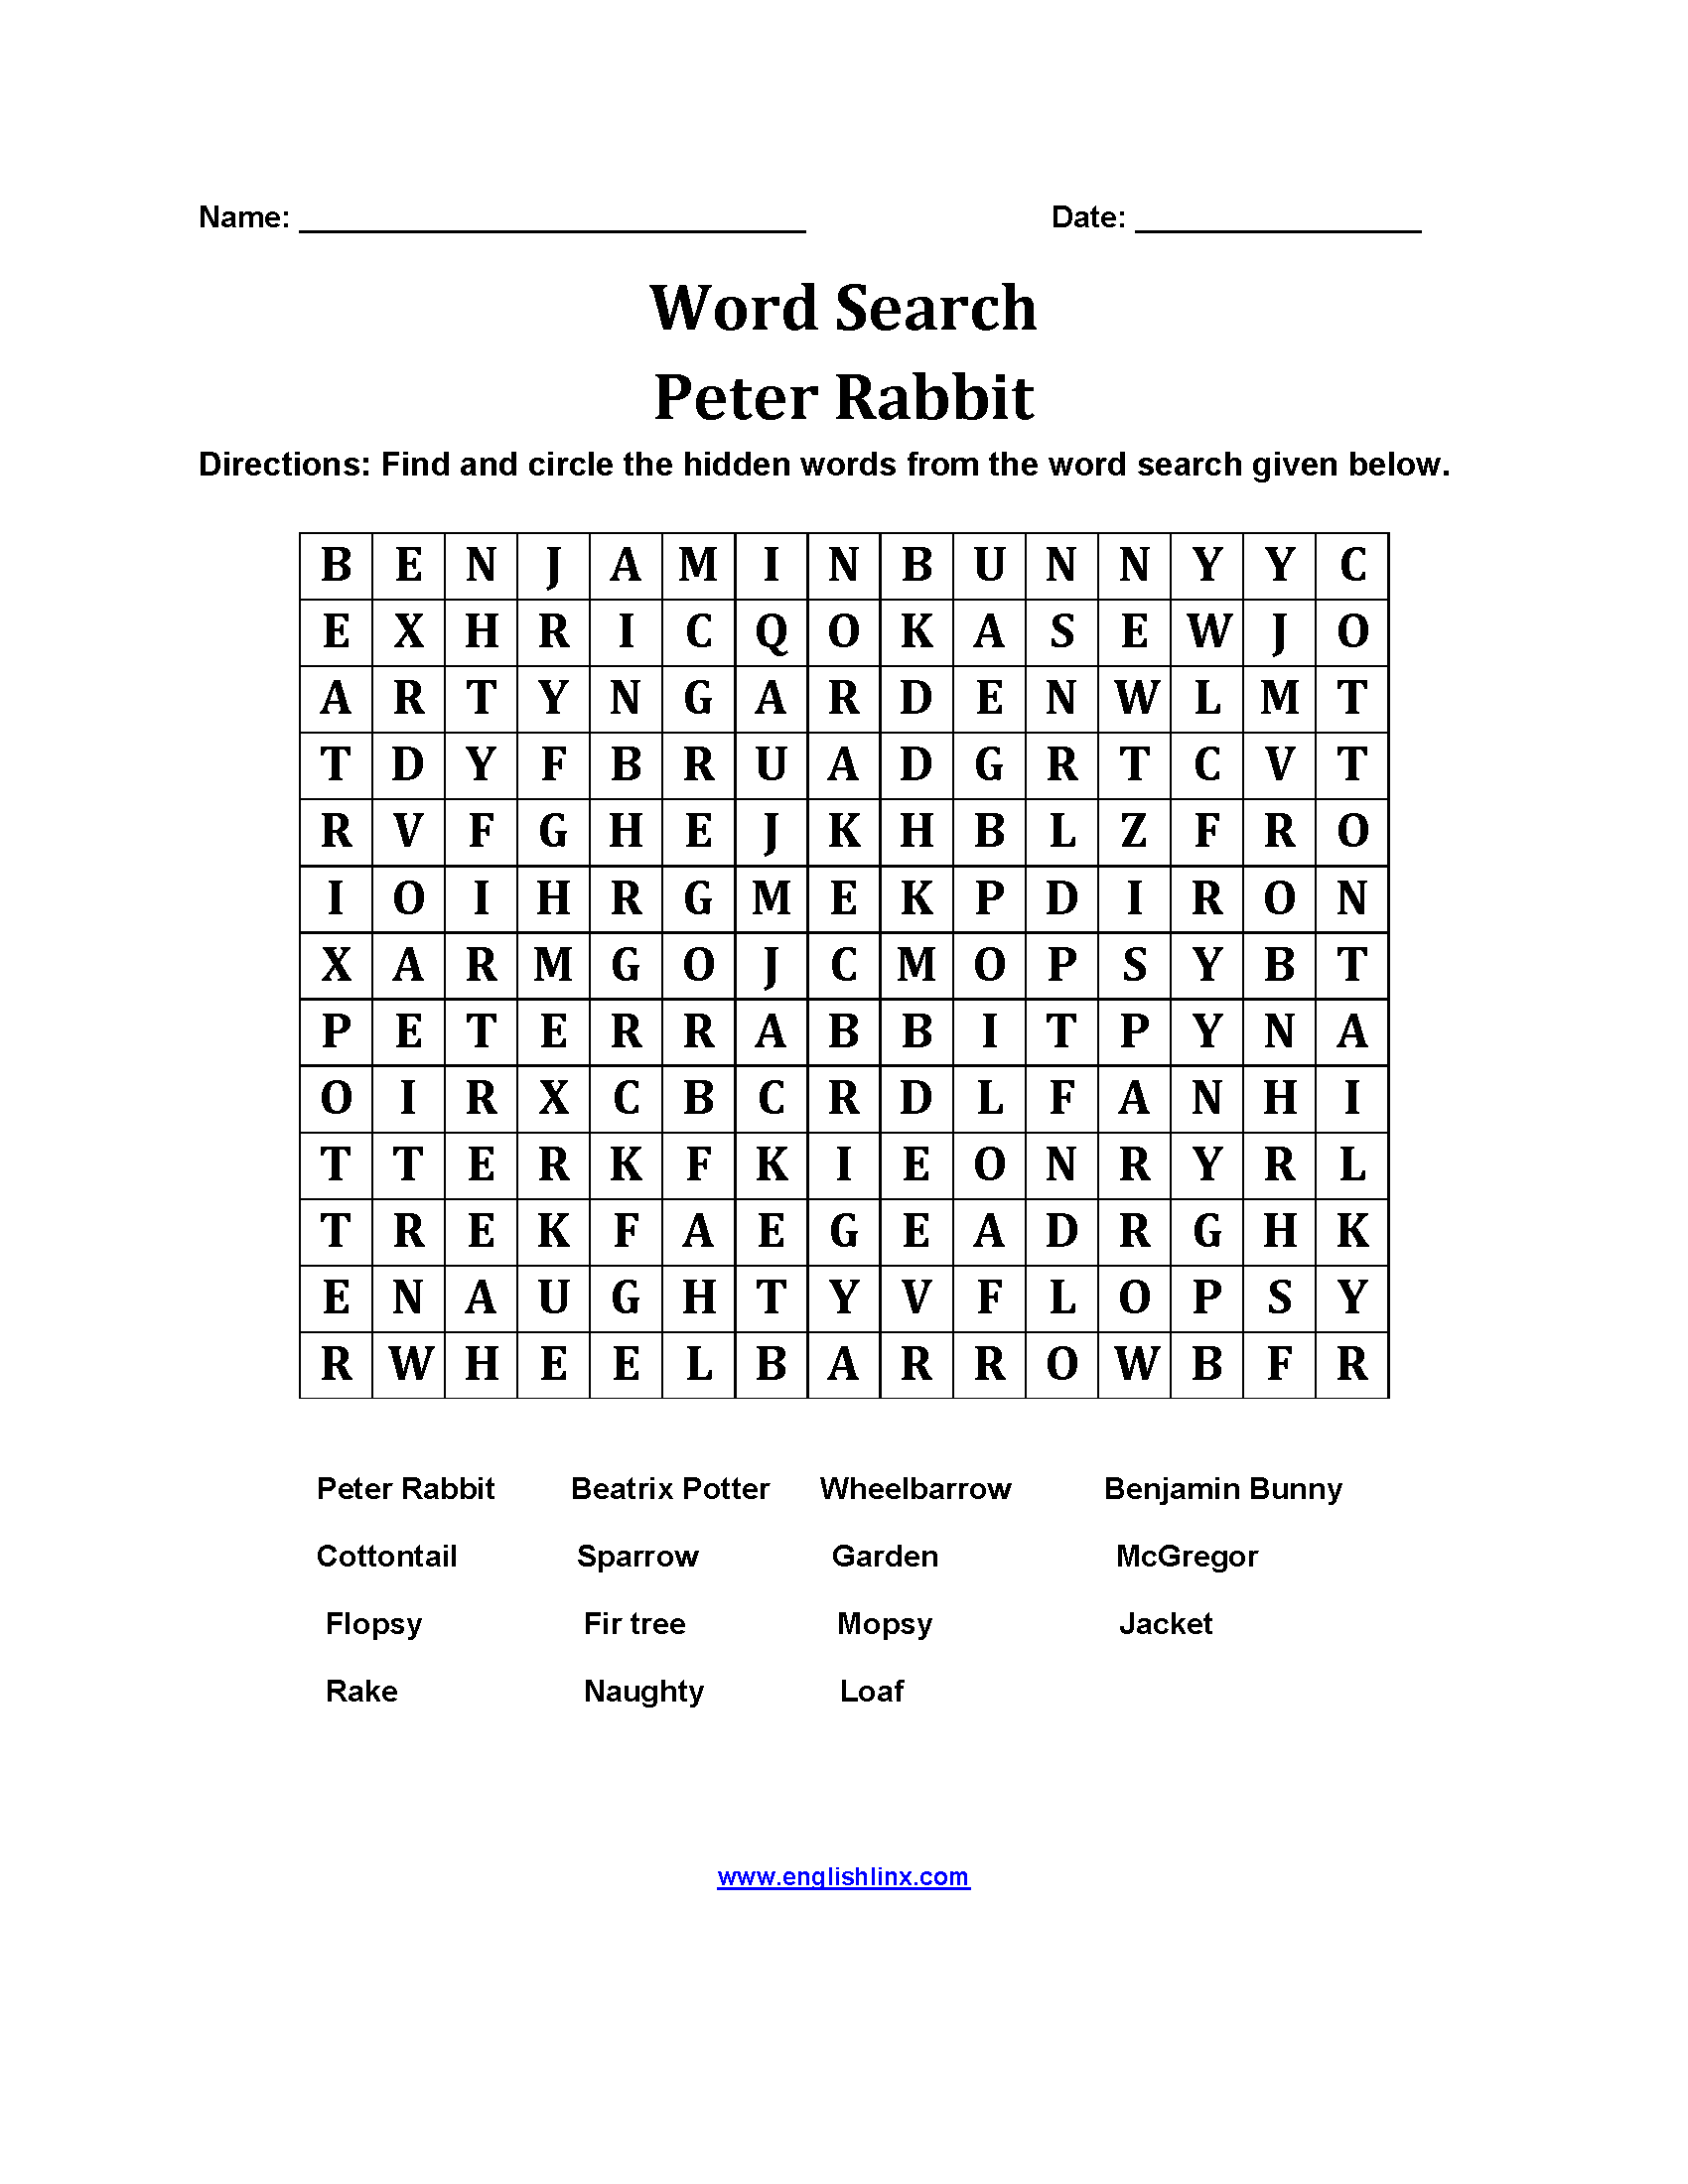 Peter Rabbit Word Search Worksheets